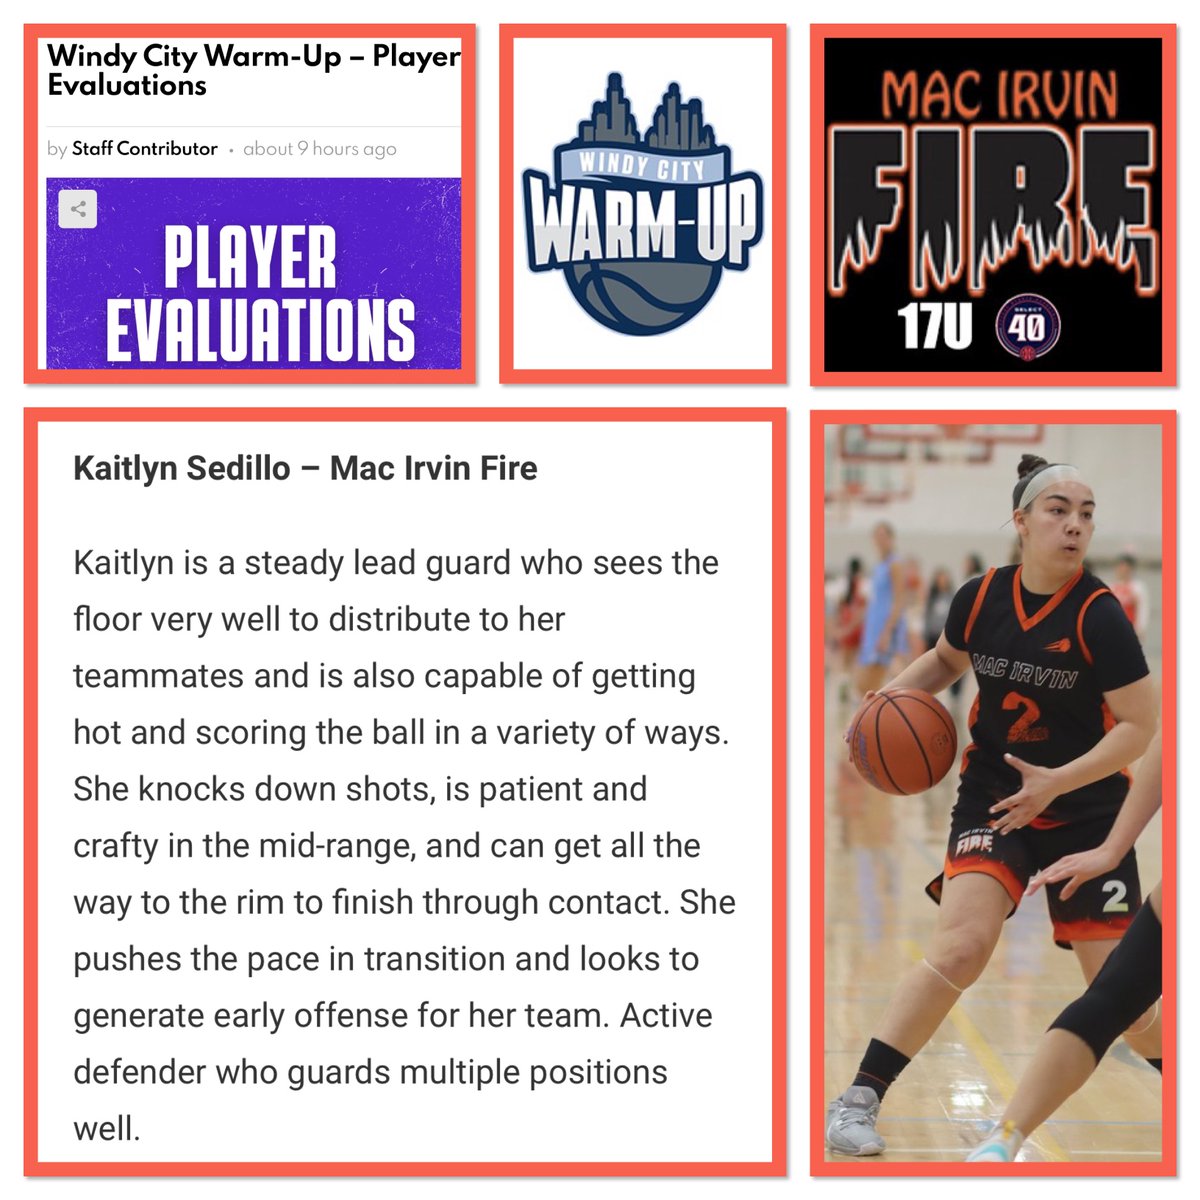 Thank you @JrAllStarBB for highlighting my play at the @SelectEventsBB 'Windy City Warm-Up' Tournament. I really appreciate being included in your evaluations and watching me and my @MacIrvinGirls team compete! @JrAllStar_IL @PriceJameson1 #2025PG #02 @MacBuckets21